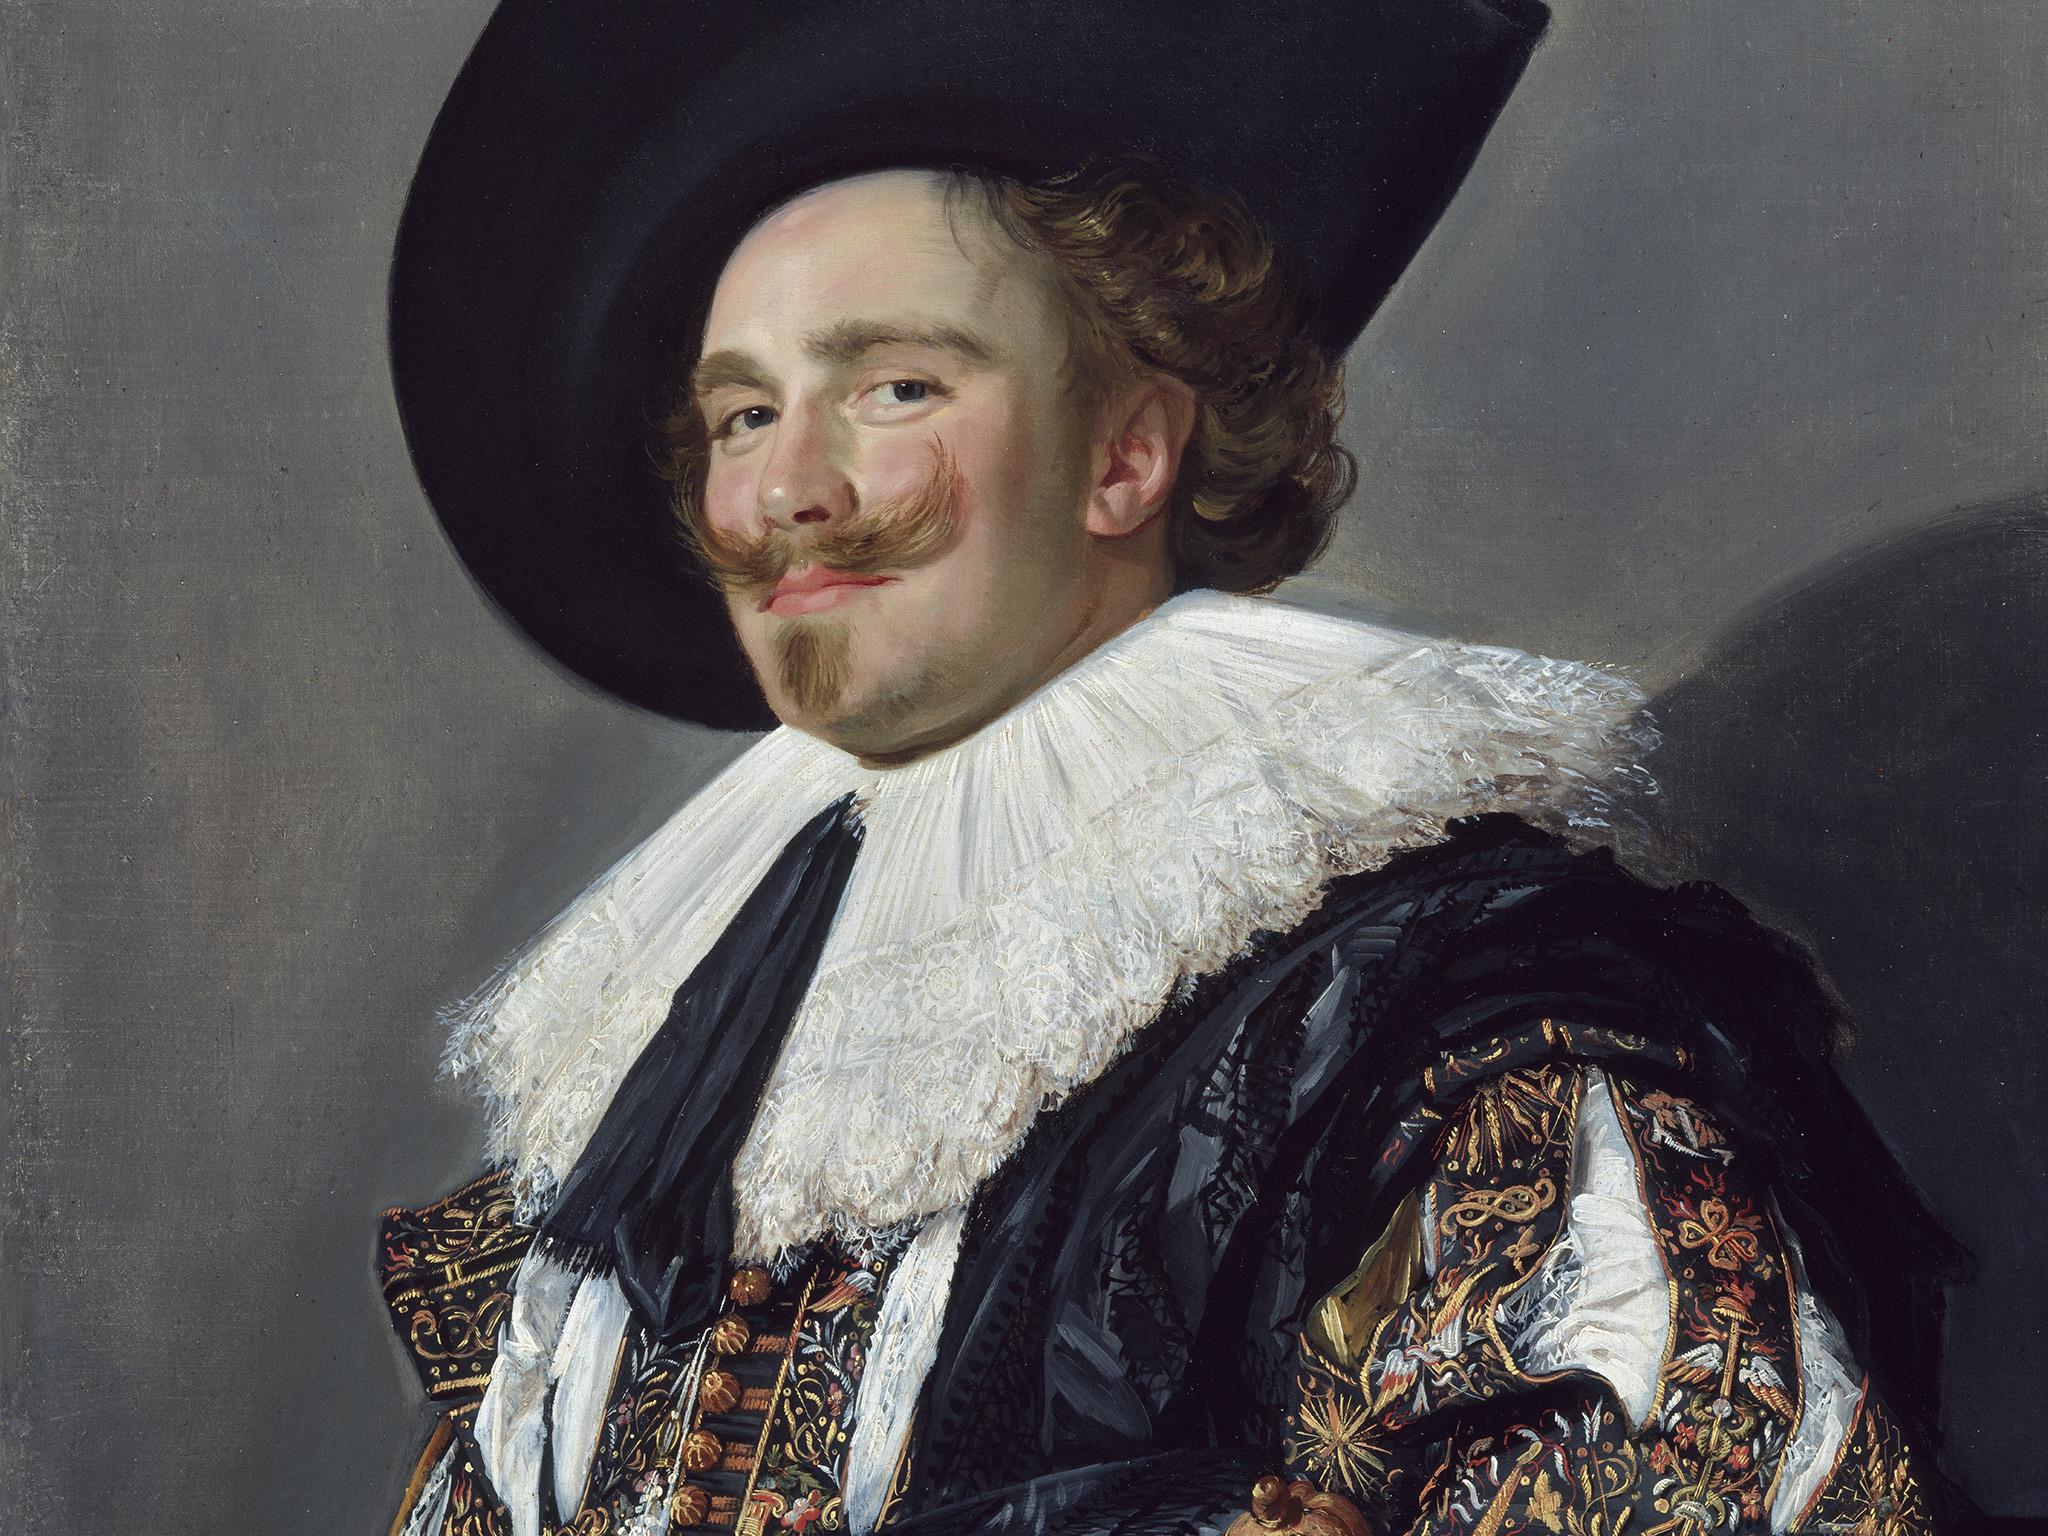 ‘The Laughing Cavalier’ was given its name by a journalist when it was exhibited at the Royal Academy in 1888